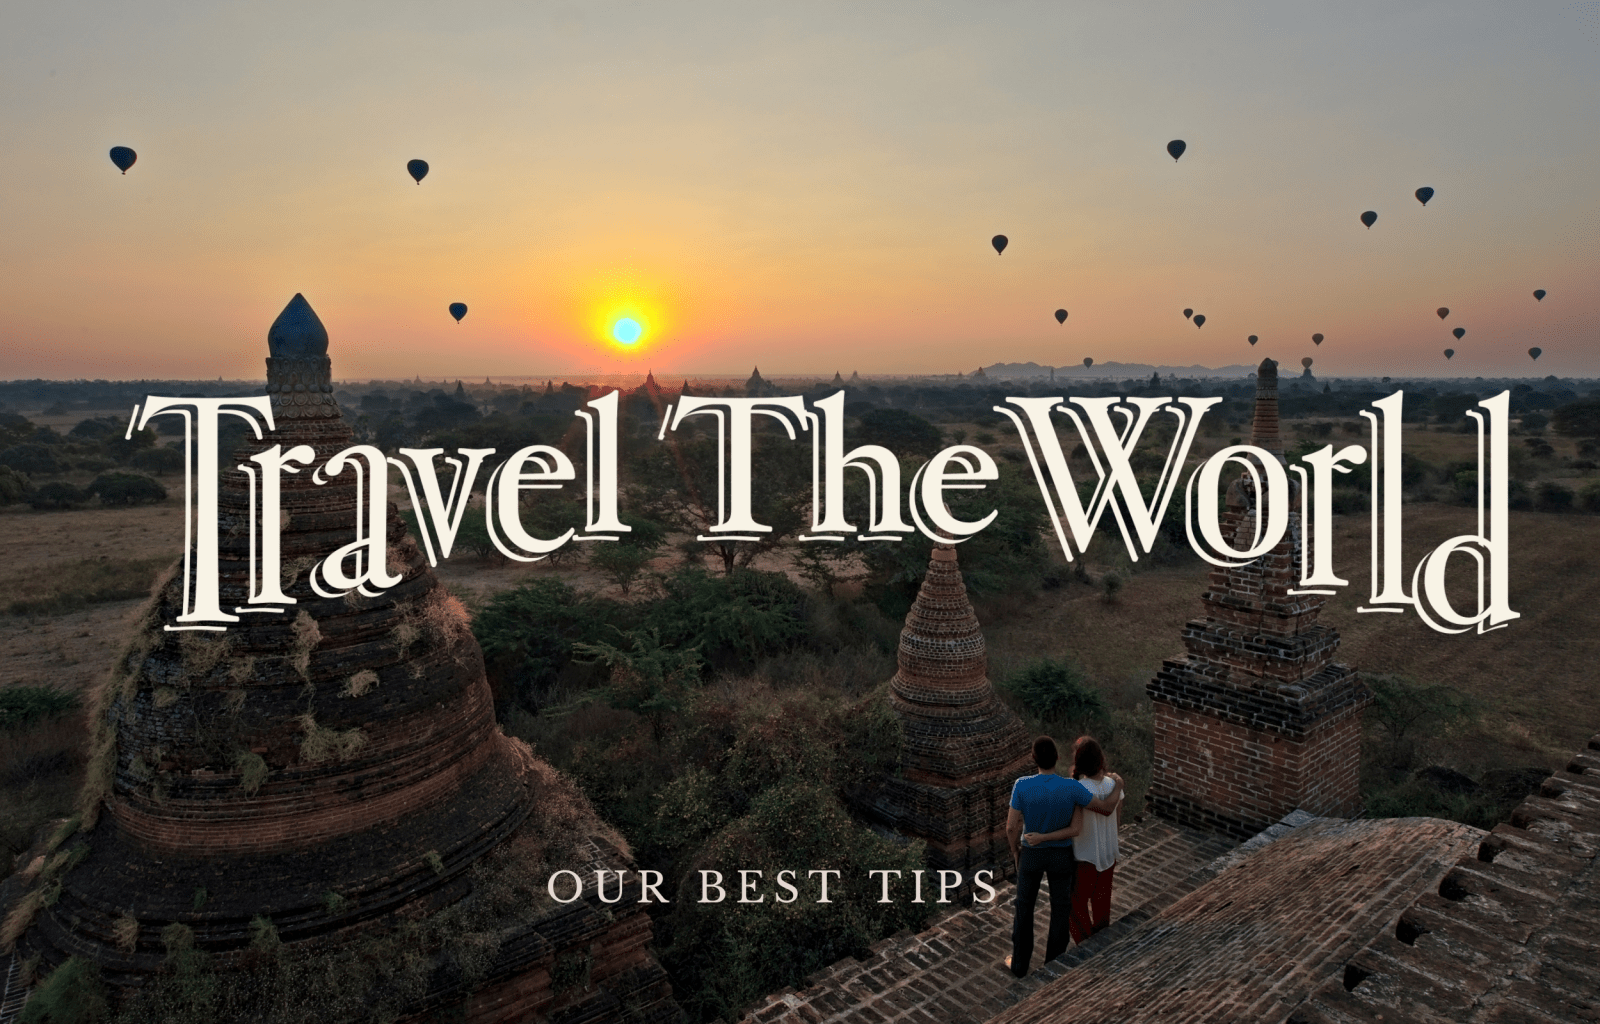 Travel around the world: All you need to know to do the trip of a lifetime